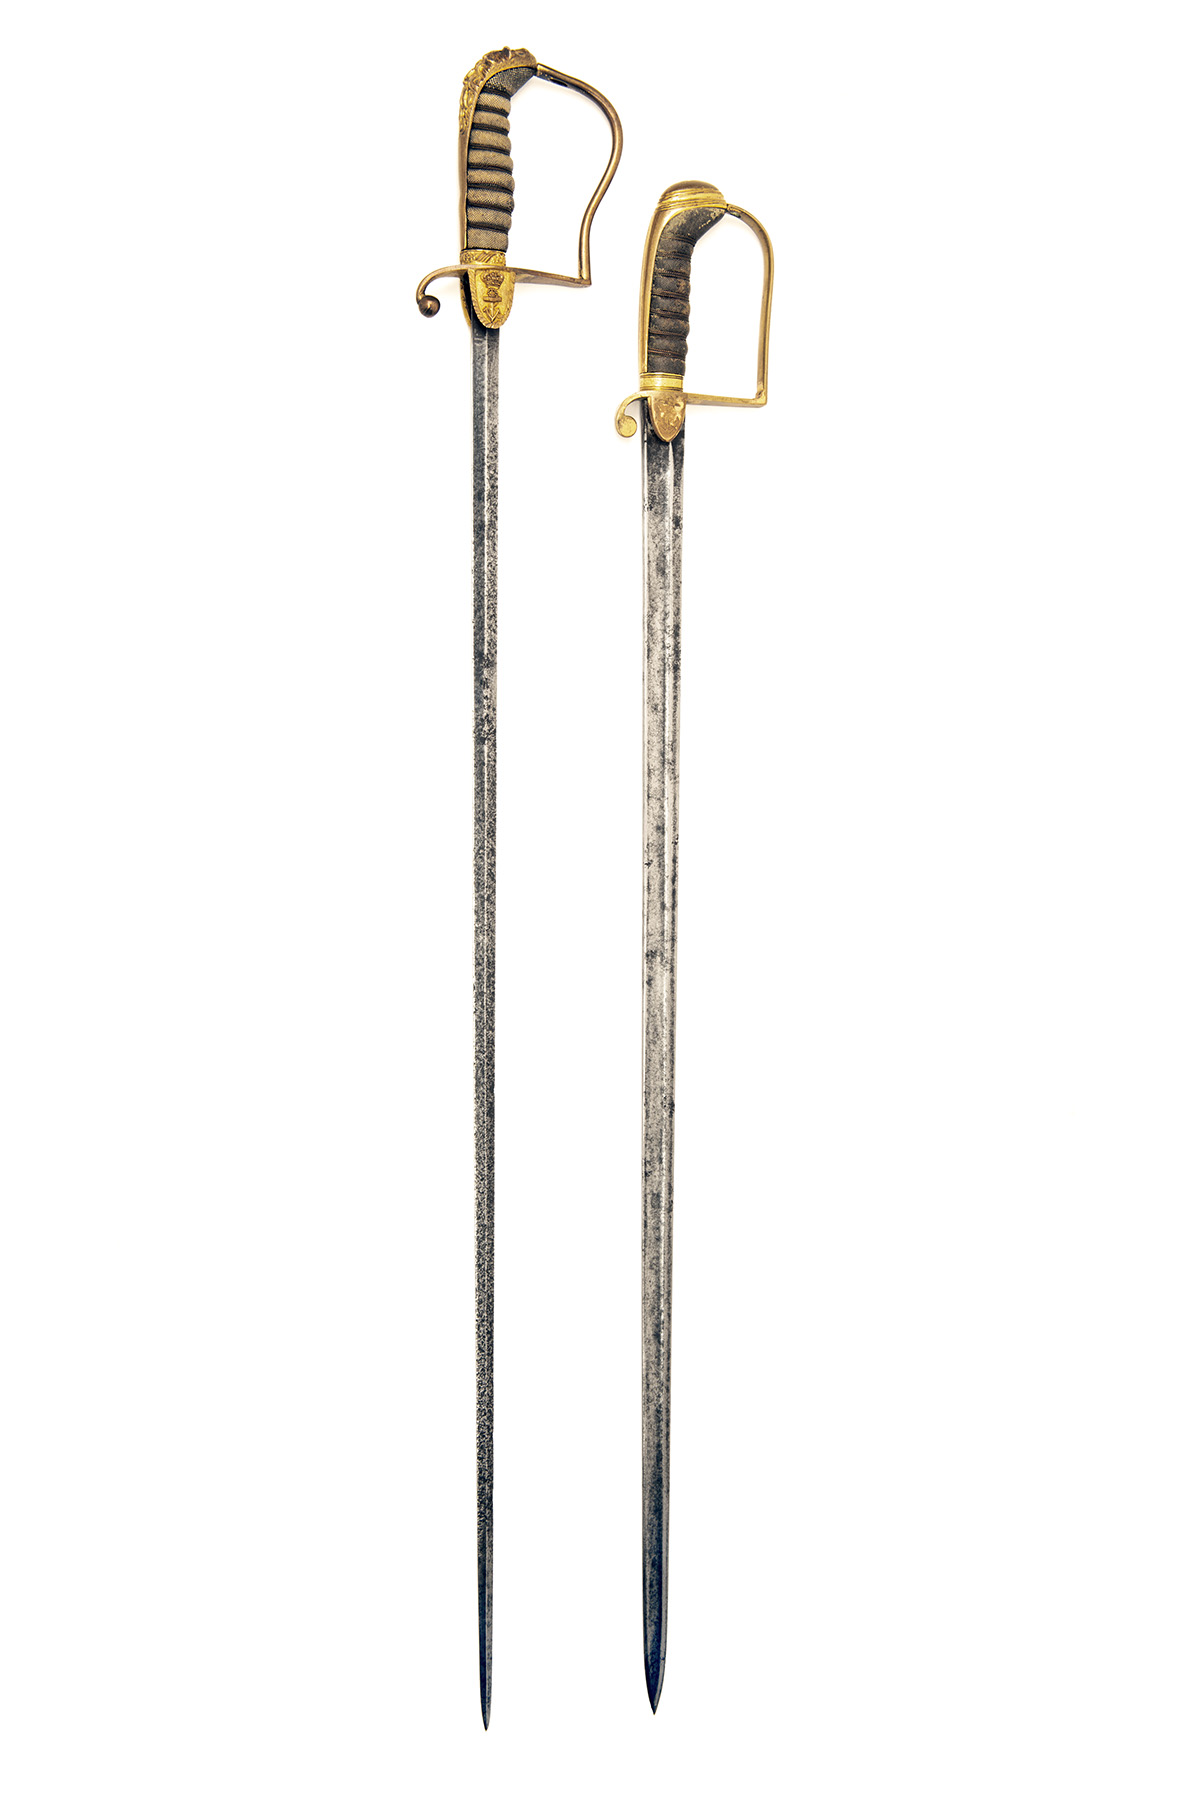 TWO GEORGIAN BRITISH NAVAL ENSIGN'S SWORDS, late 18th to early 19th century, the first with straight